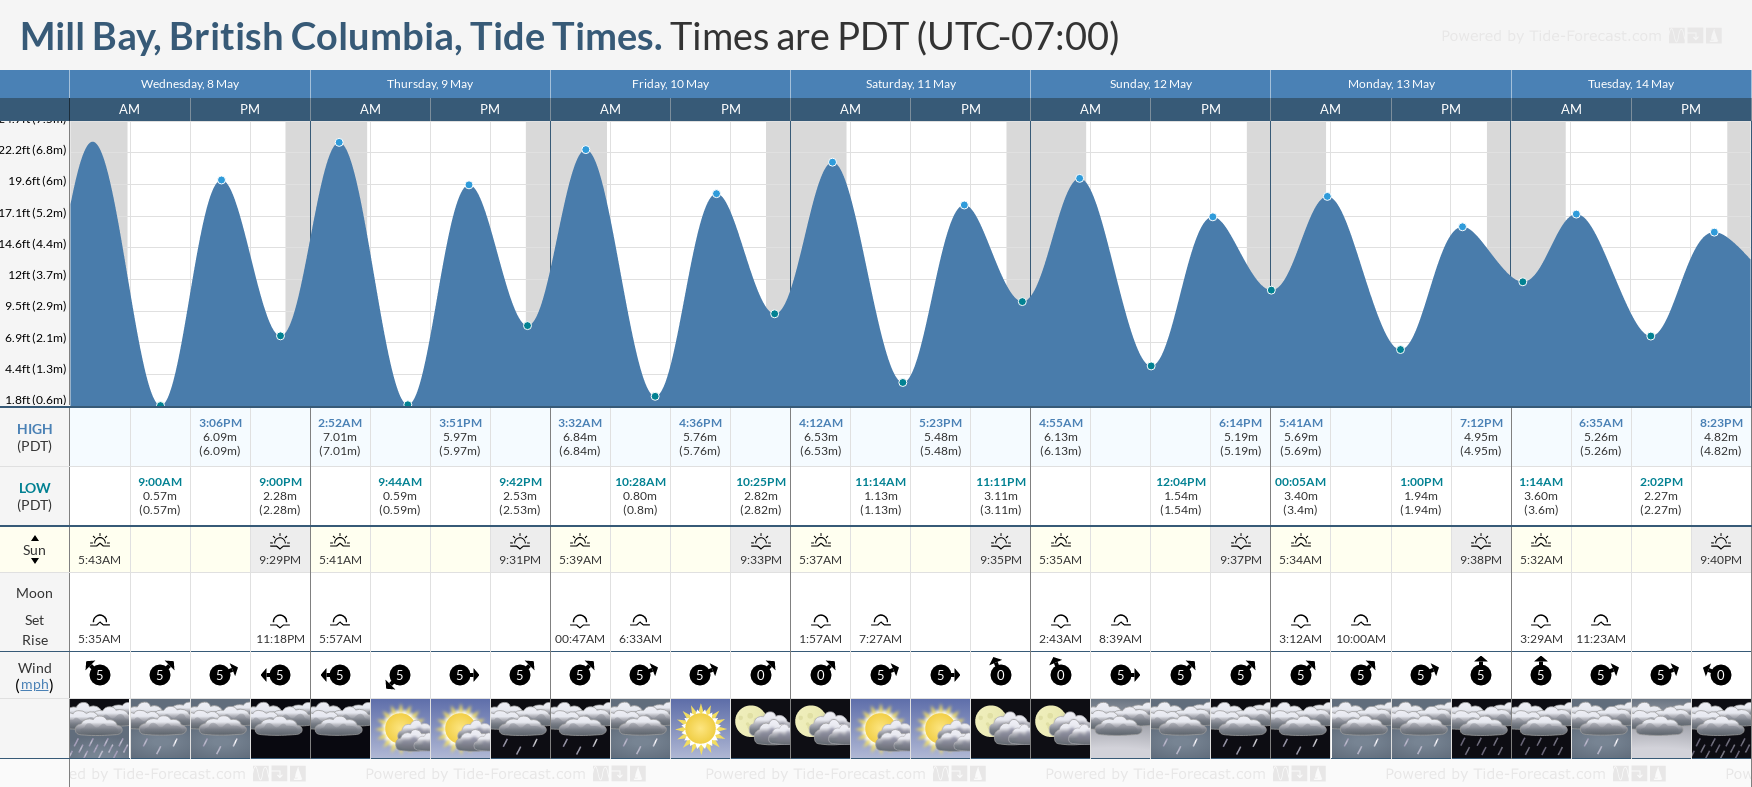 Mill Bay, British Columbia Tide Chart including high and low tide tide times for the next 7 days